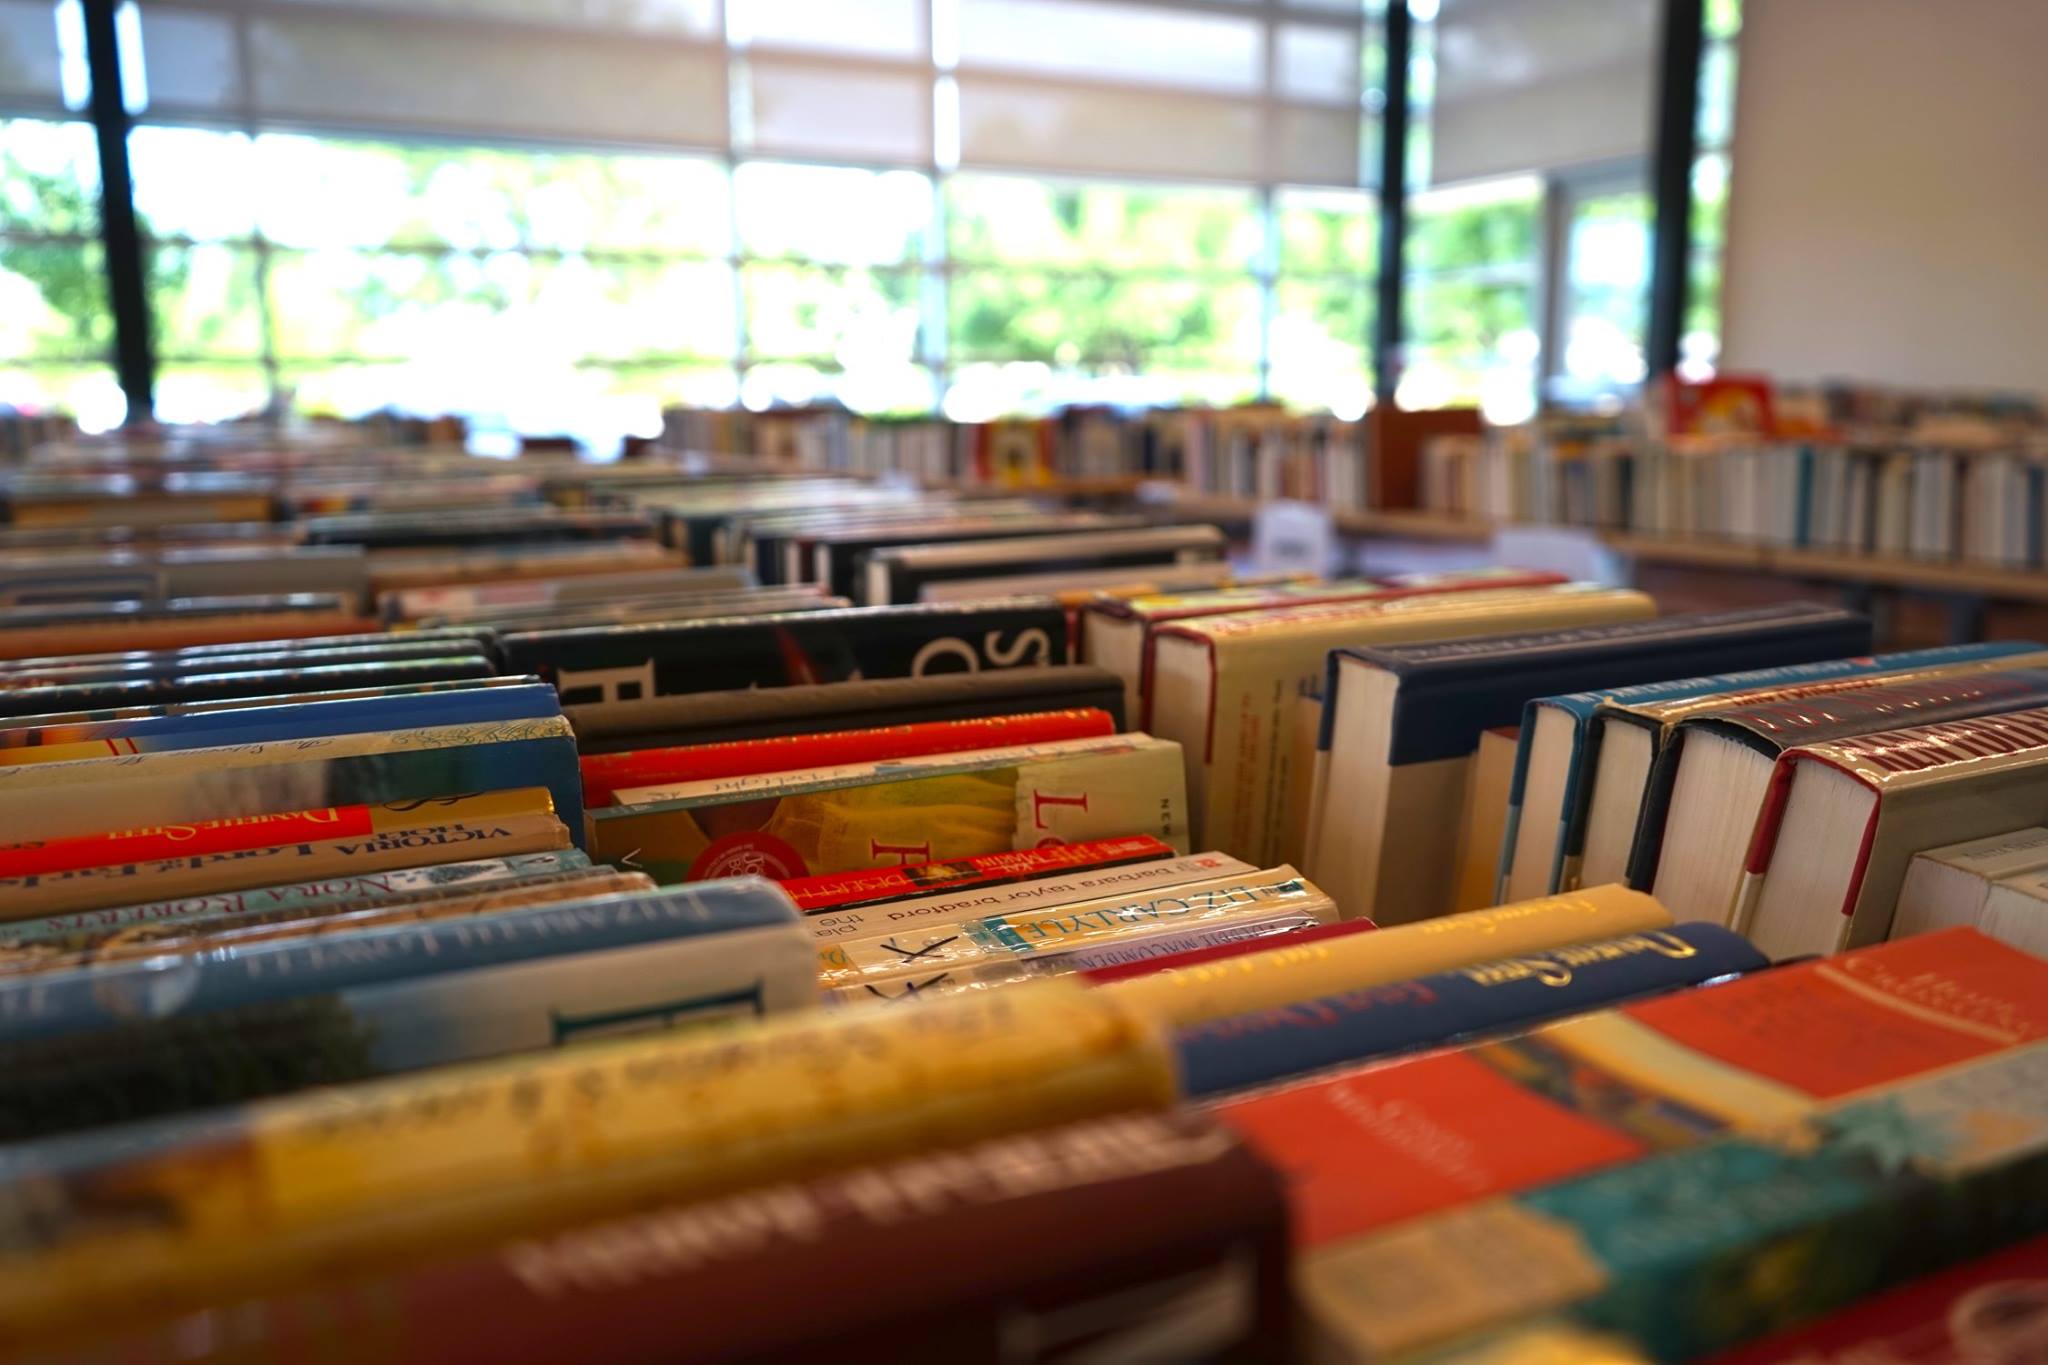 Rows of books lined up on tables for a book sale in front of a large window.